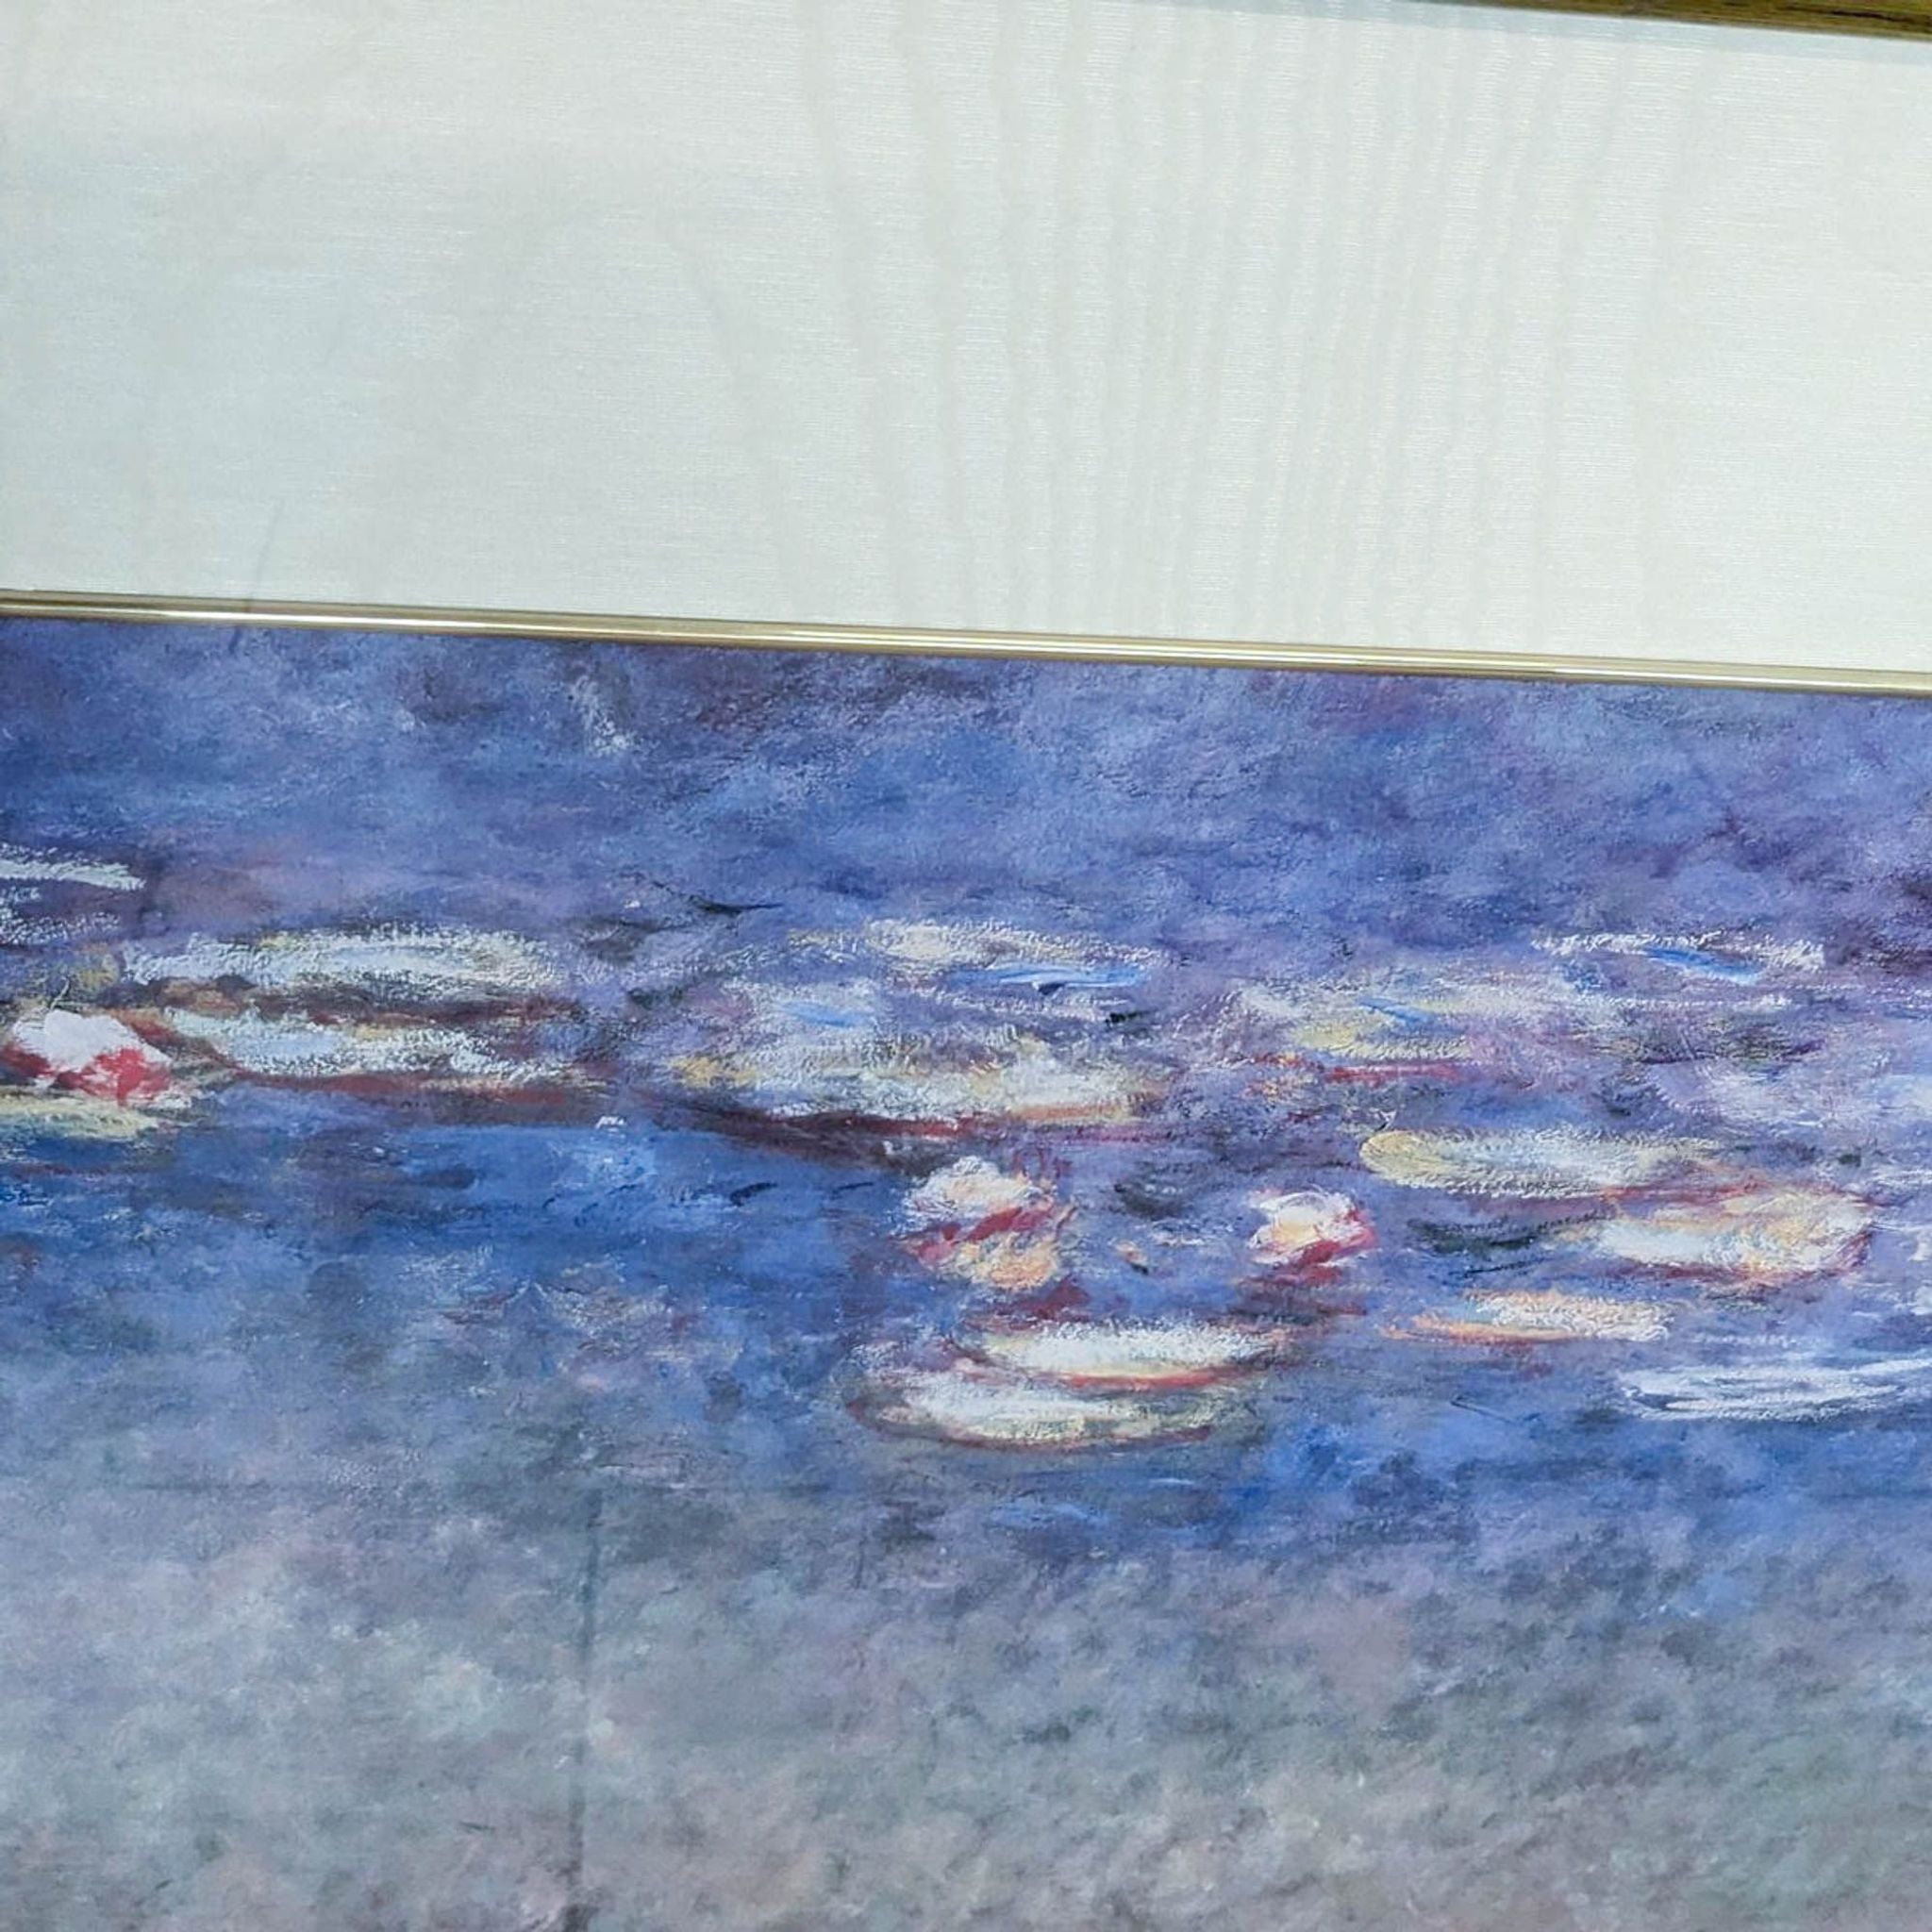 Alt text 2: Back view of a framed Monet "Water Lilies" lithograph showing label and hanging wire, against a woodgrain floor.